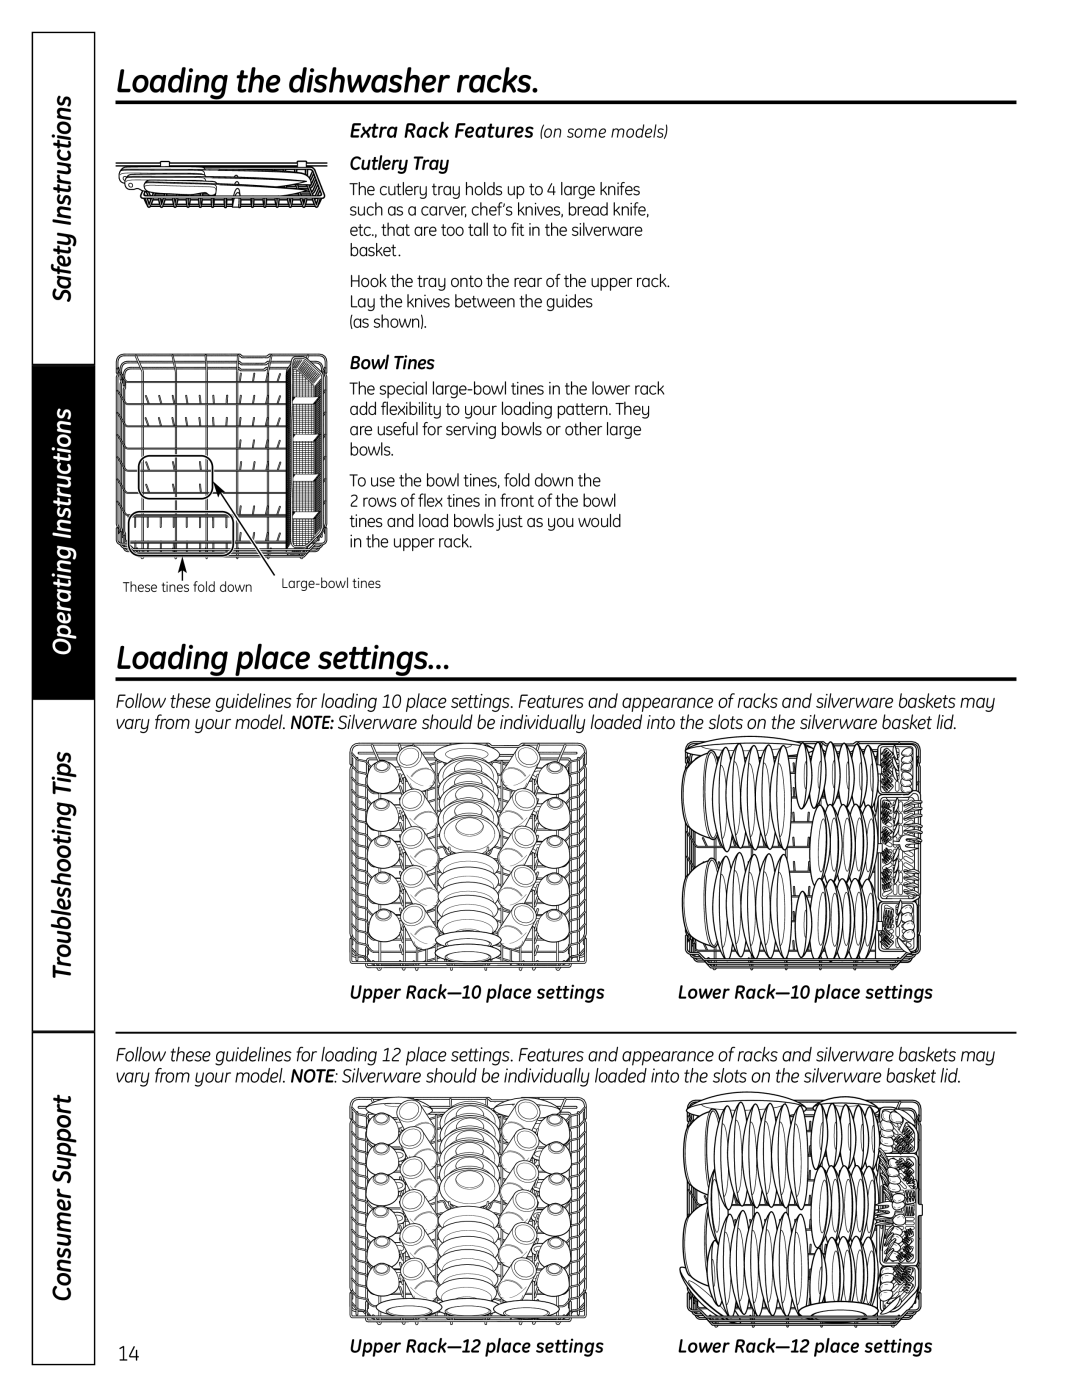 GE PDW8000 Loading place settings…, Extra Rack Features on some models, Cutlery Tray, Bowl Tines, Safety Instructions 